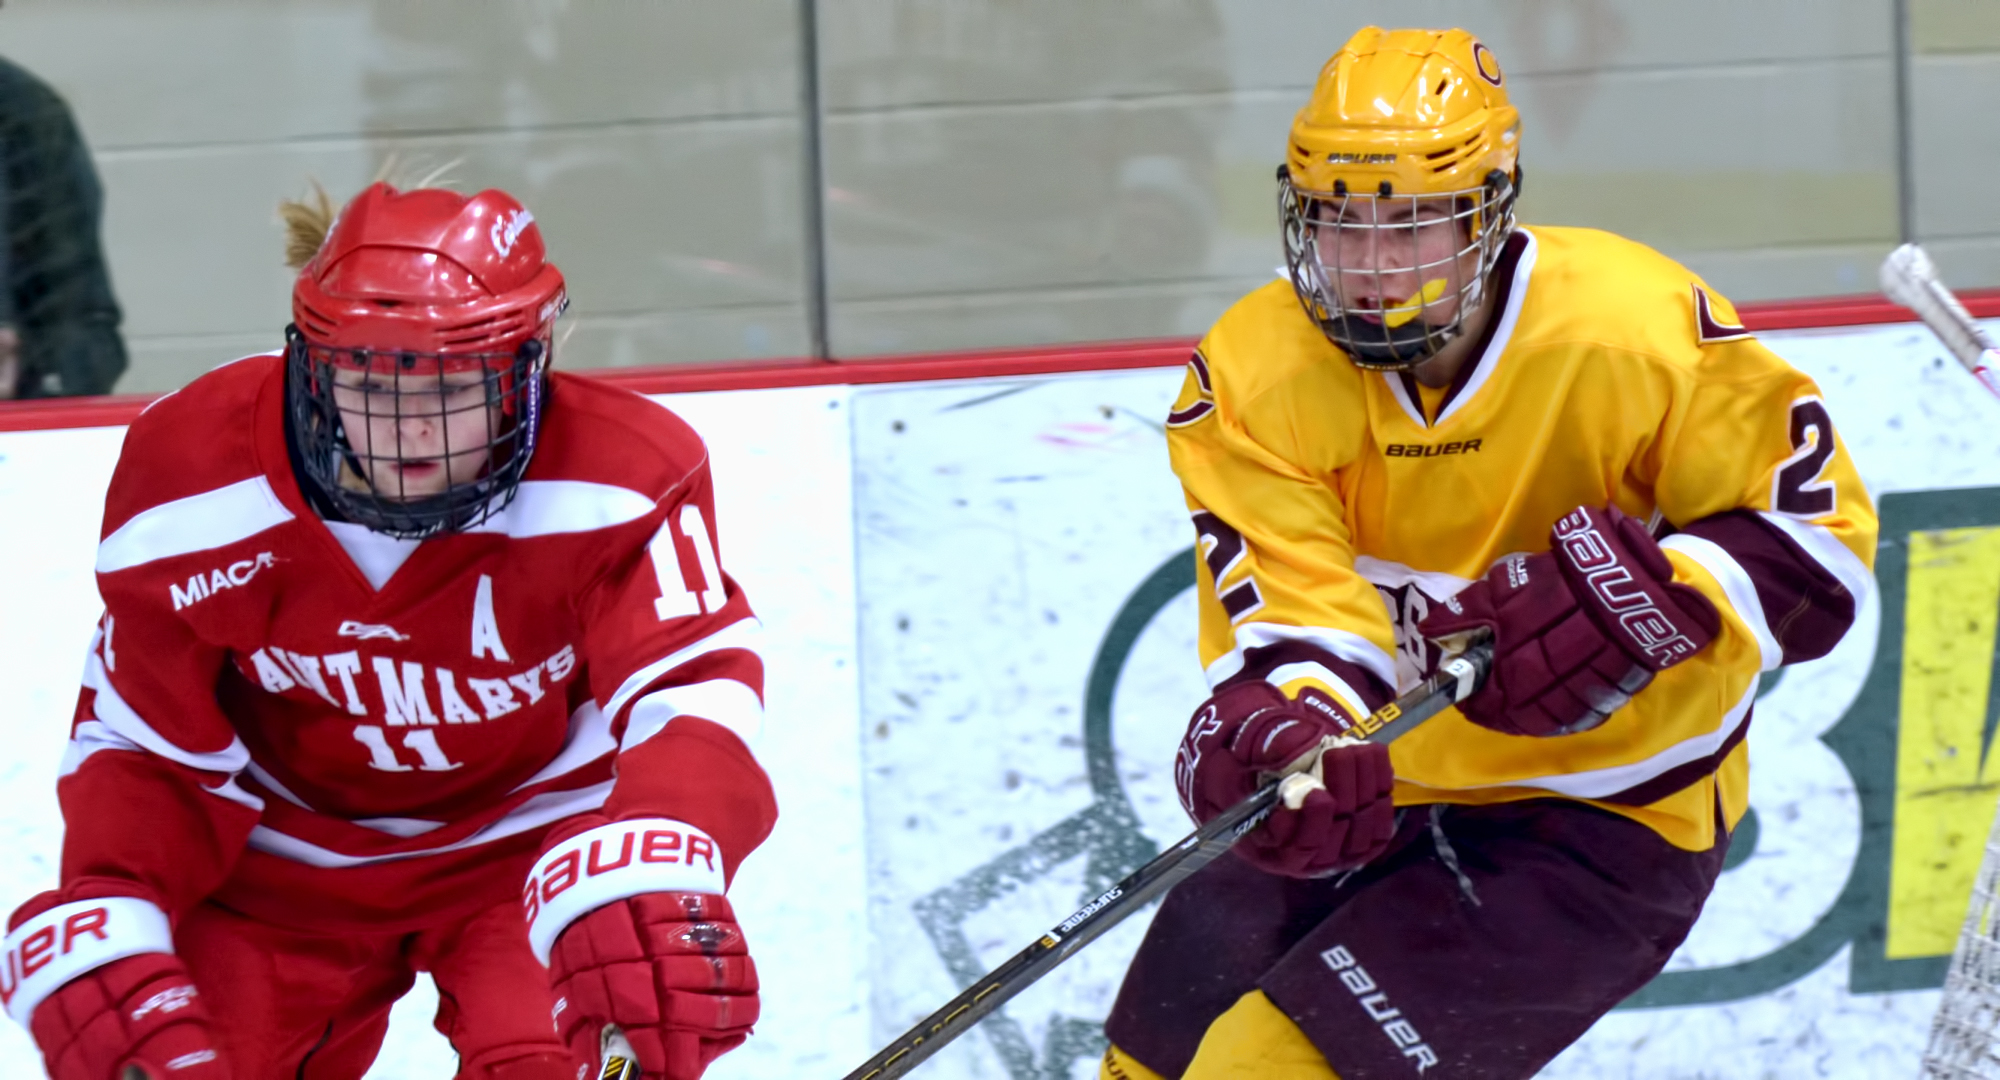 Amanda Flemming had a goal and two assists in the Cobbers' 6-3 win at St. Mary's. She leads the team with 10 goals and eight assists for 18 points.